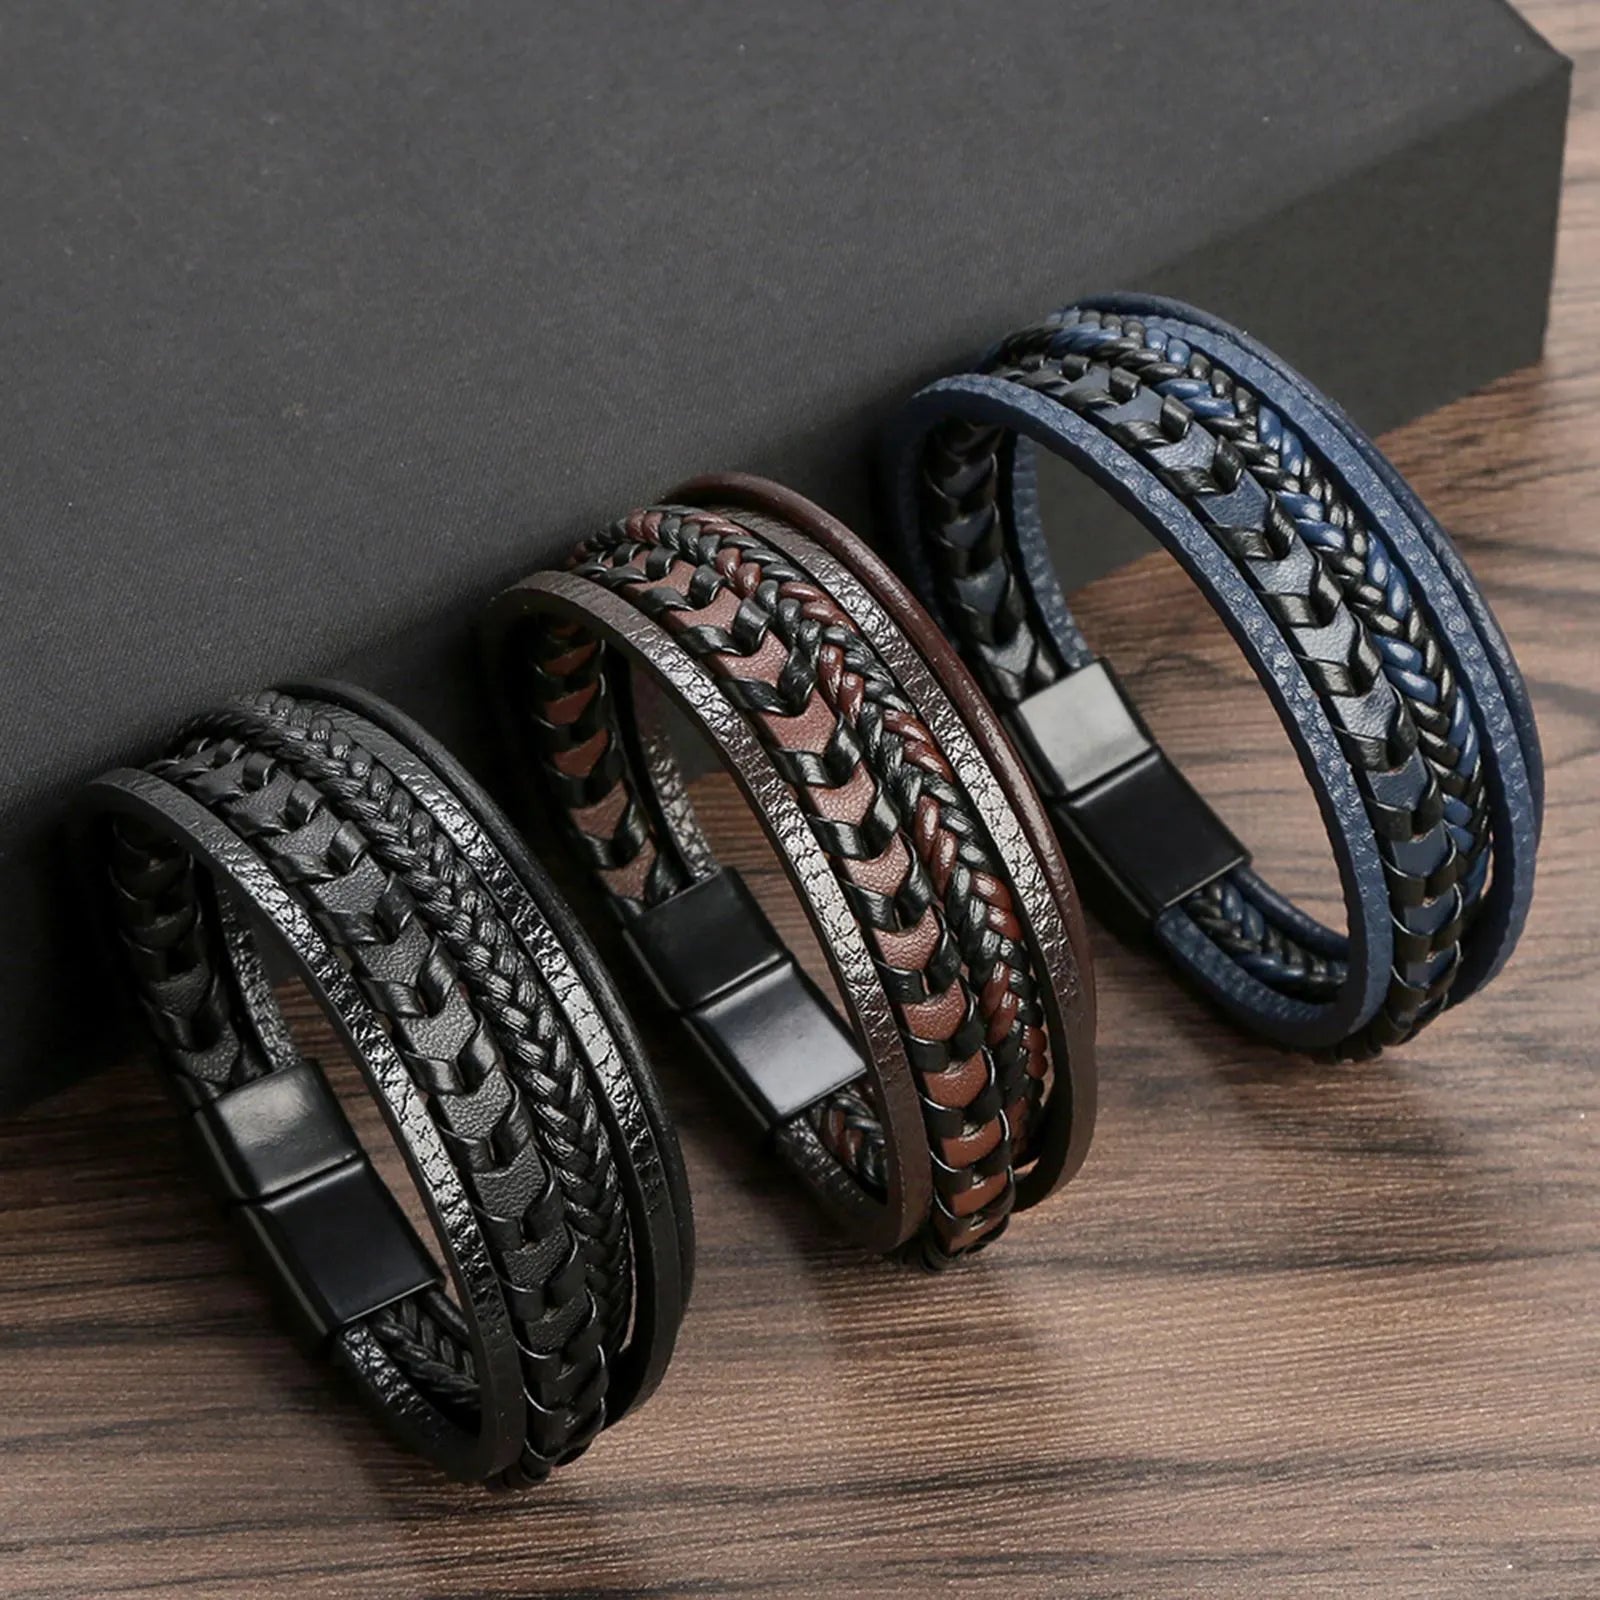 Elevate Your Style: Hand Woven Multi-Layer Leather Bracelets - The Ultimate Trend-Setting Gift for Wellness & Fashion Aficionados